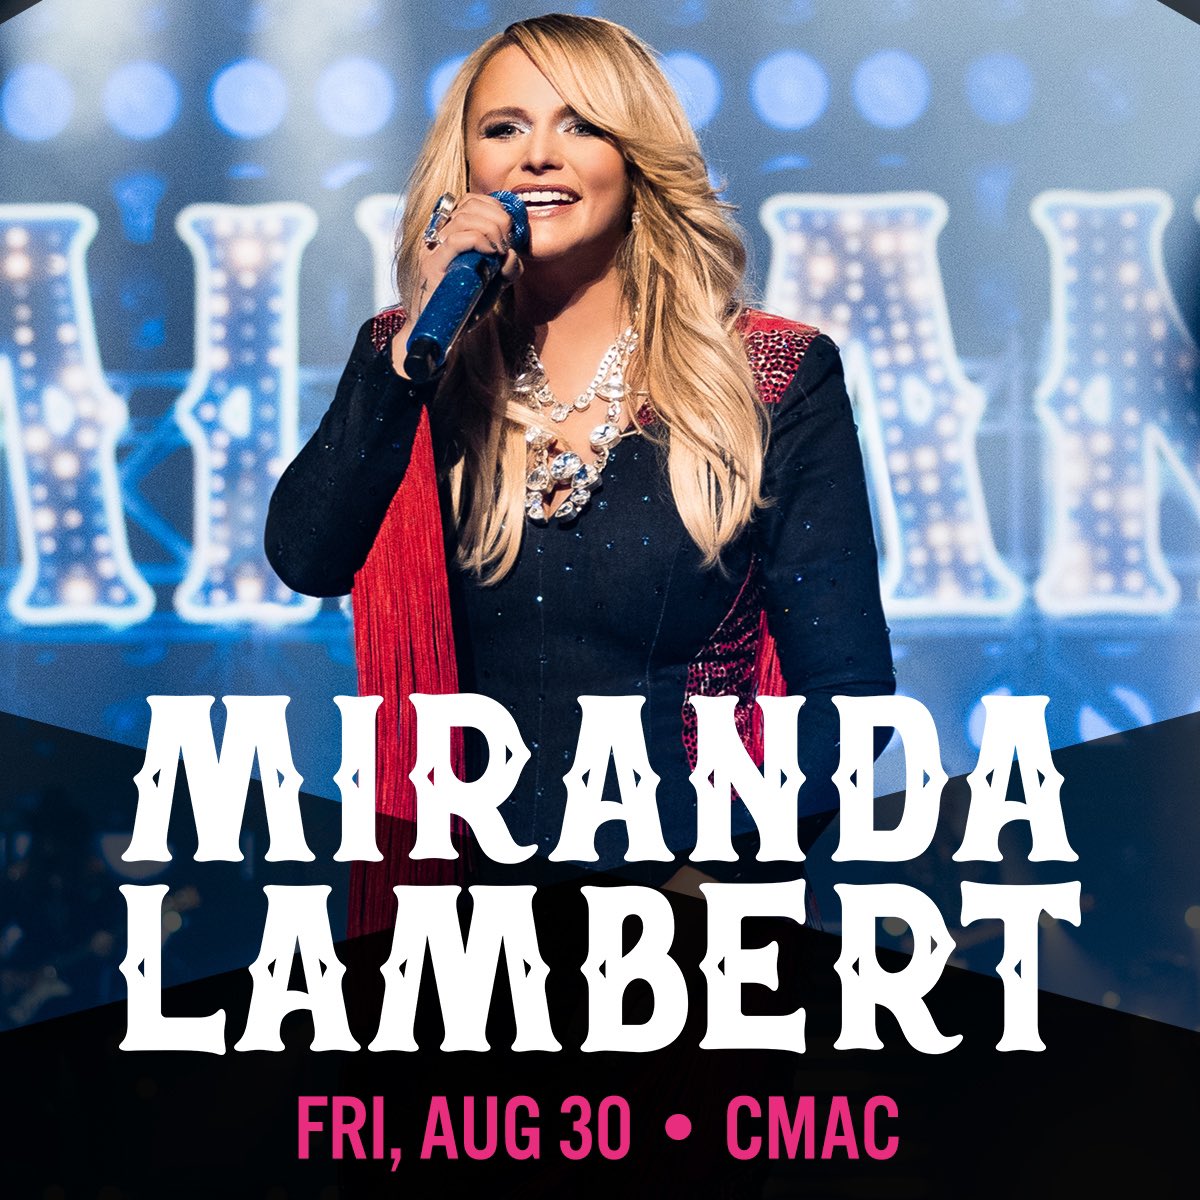 ✨ON SALE NOW✨ Miranda Lambert returns to CMAC on Friday, August 30! Don't miss an incredible night of music under the CMAC stars. Tickets: ticketmaster.com/event/00006082…